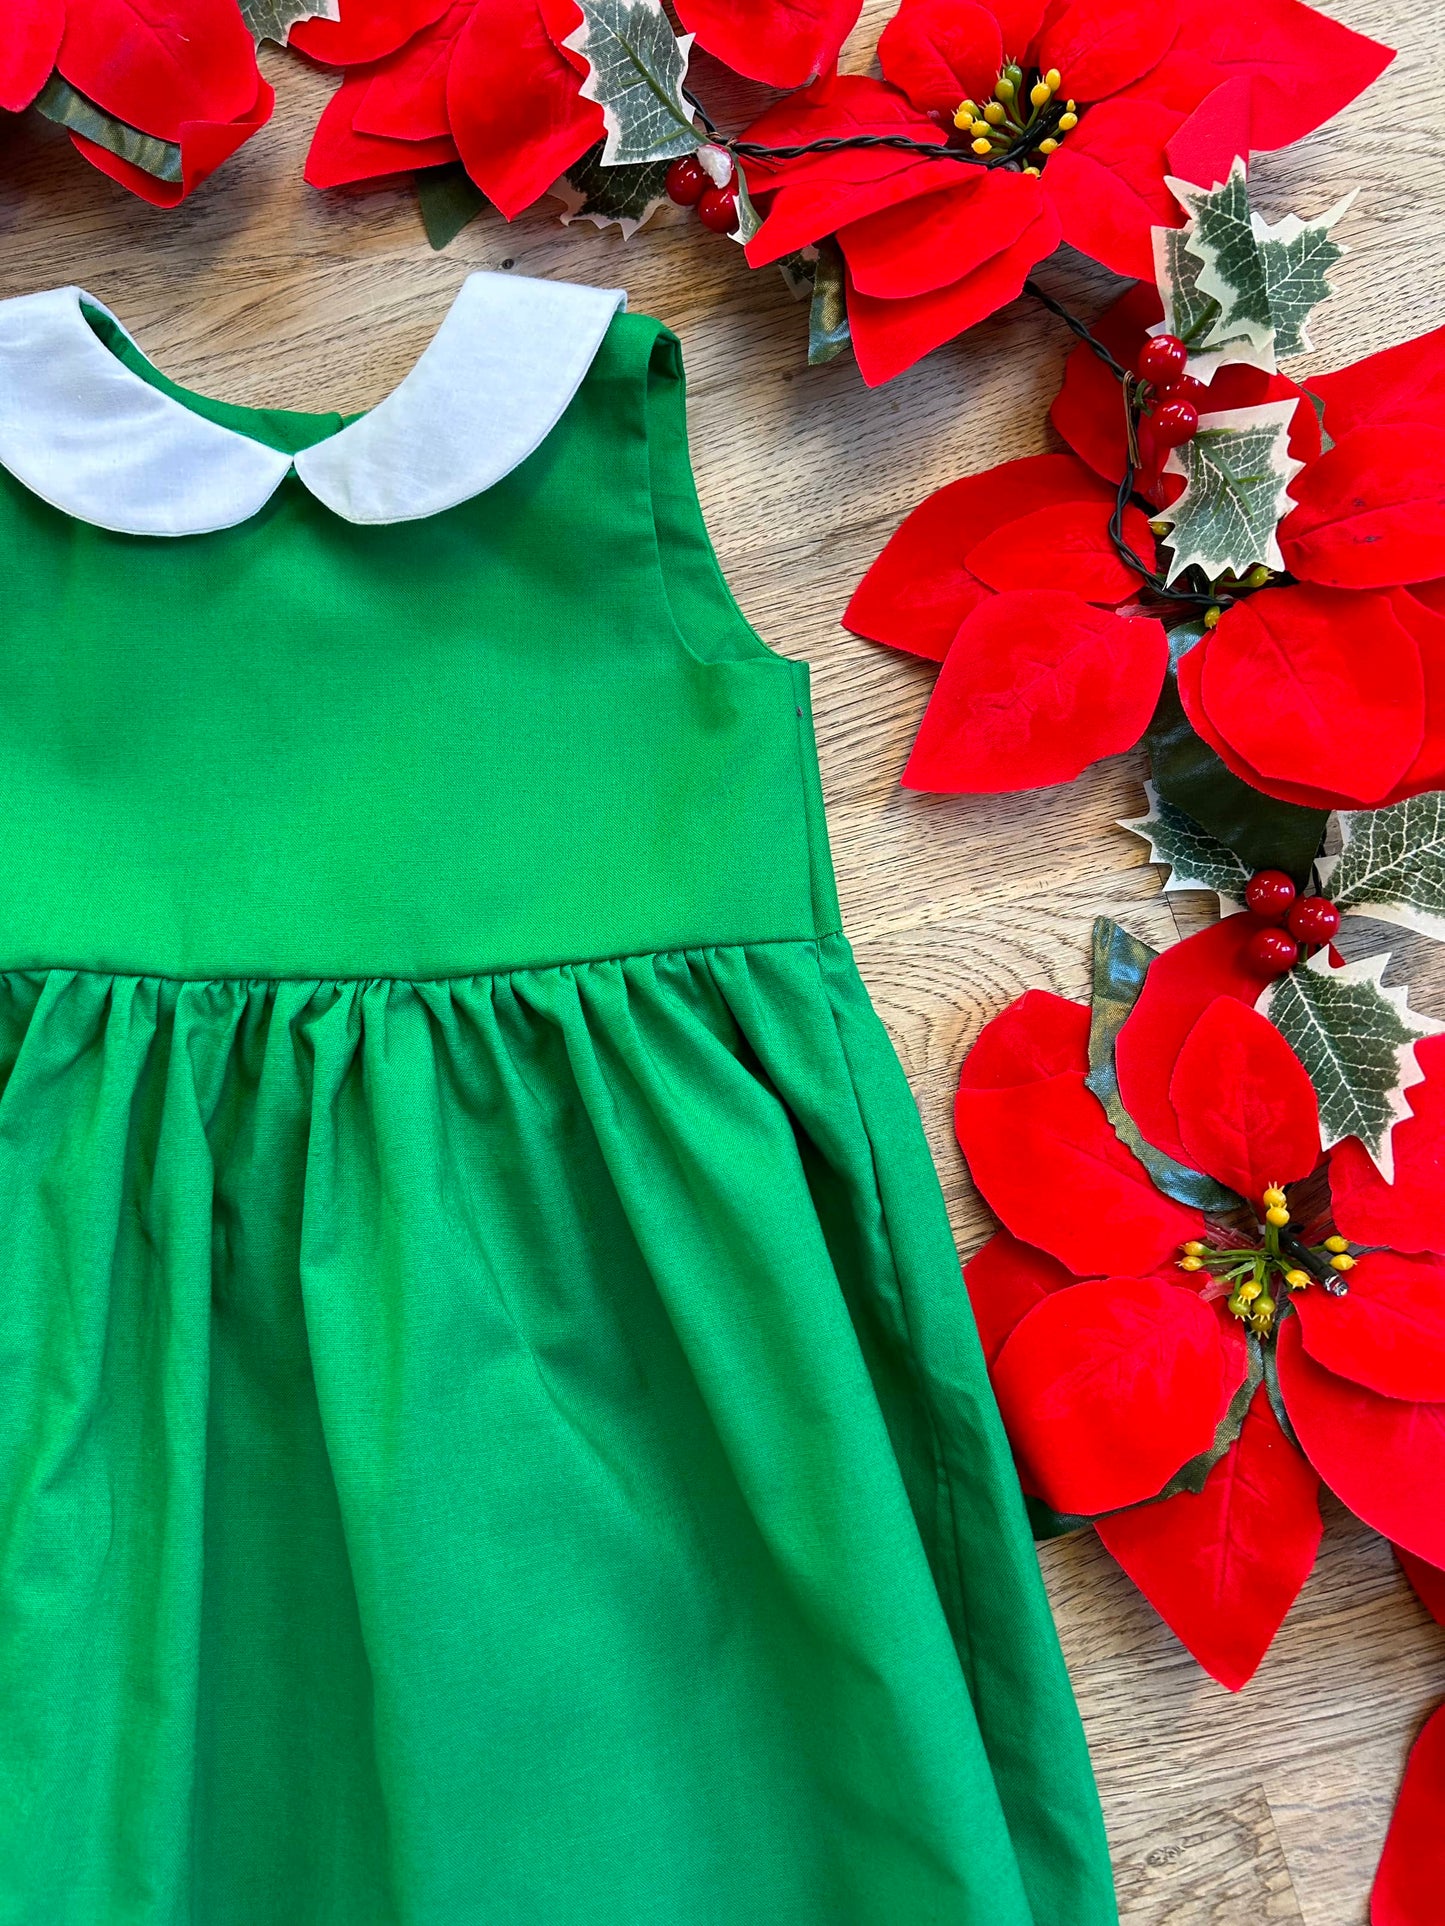 DRESS - Classic Green Dress with Peter Pan Collar (MADE TO ORDER)